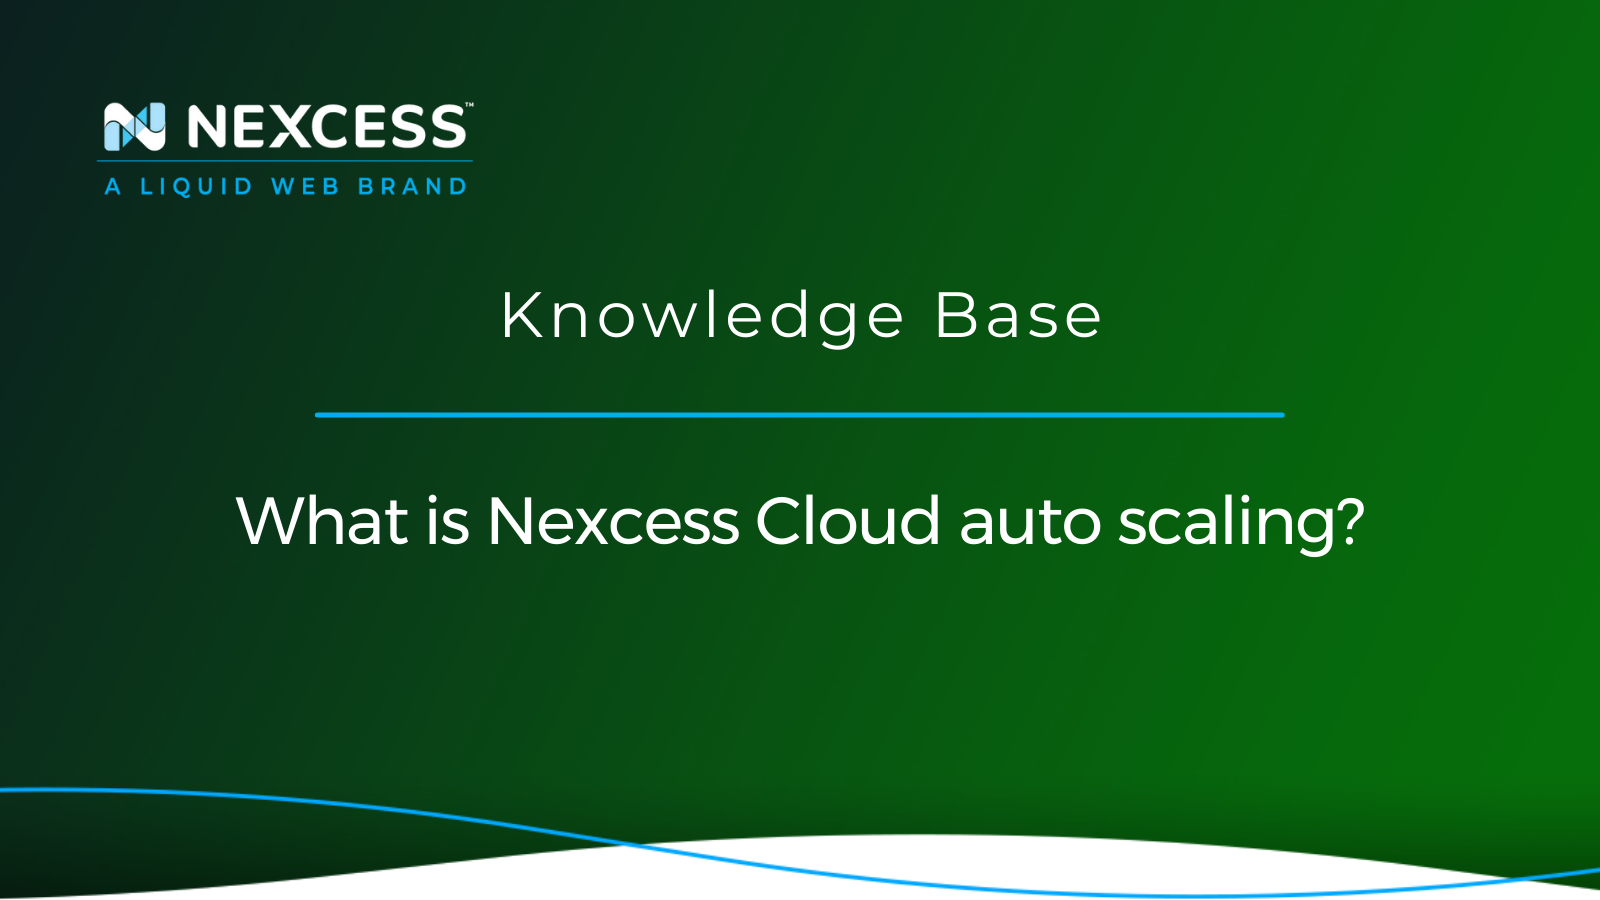 What is Nexcess Cloud auto scaling?